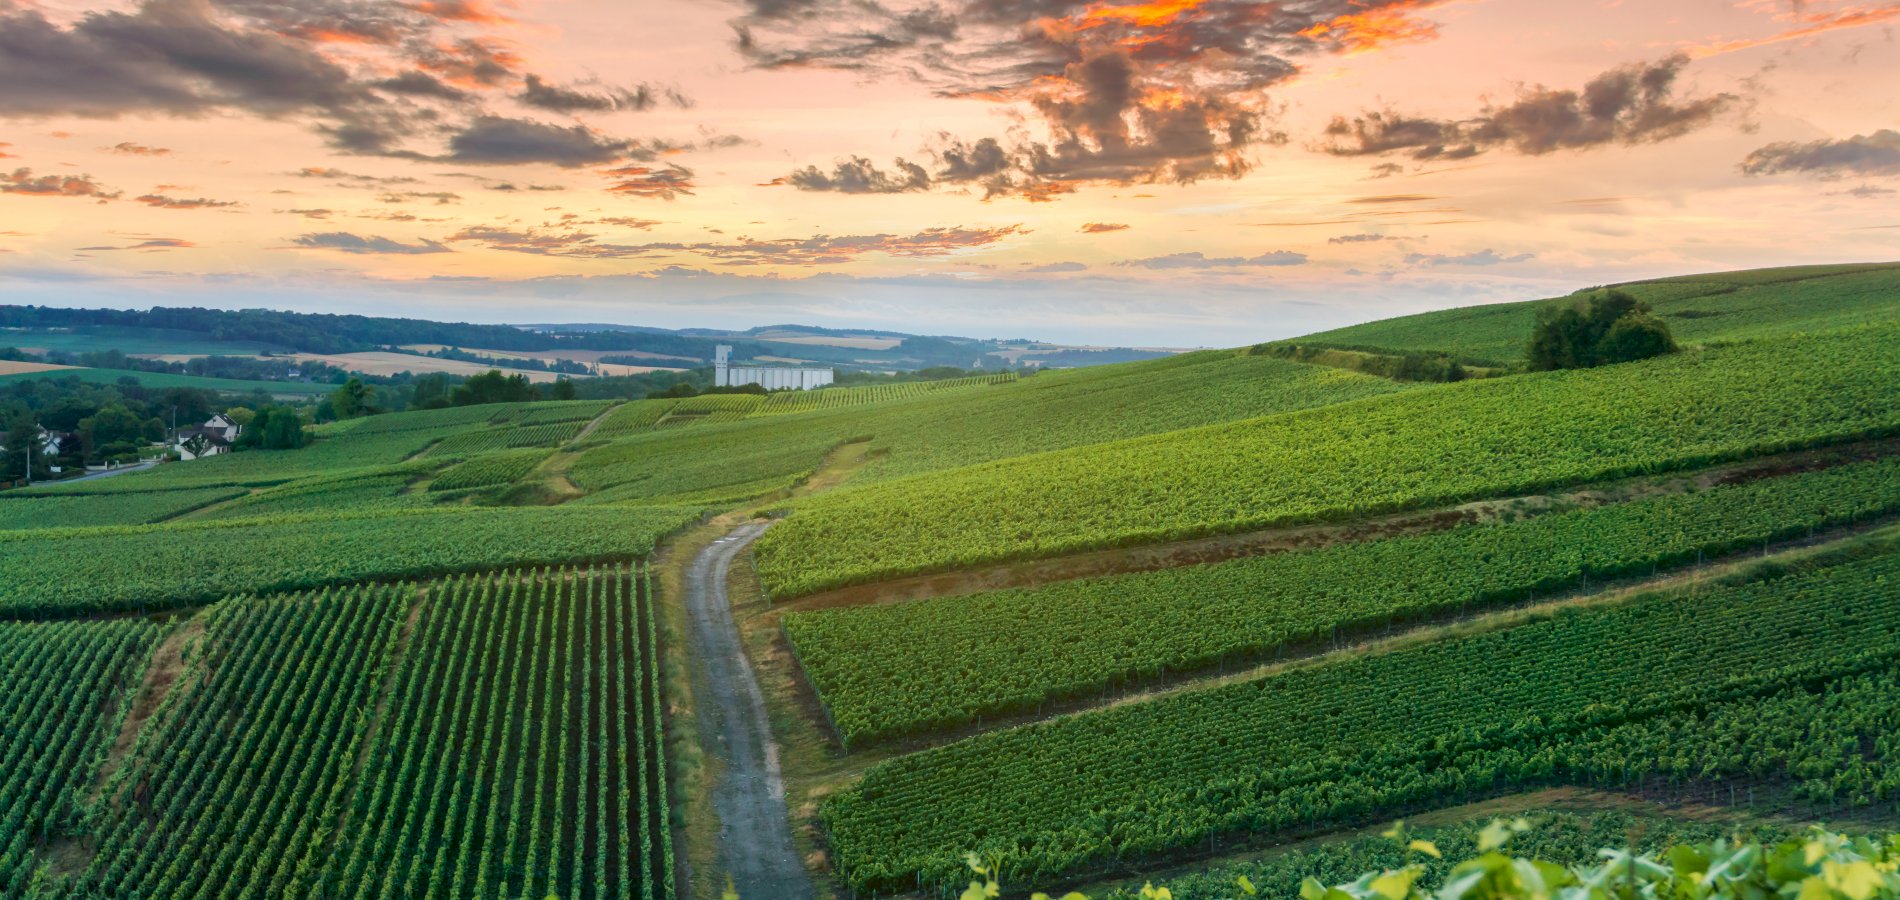 Ophorus Tours - Champagne Wine Tour Private Half Day Trip from Reims